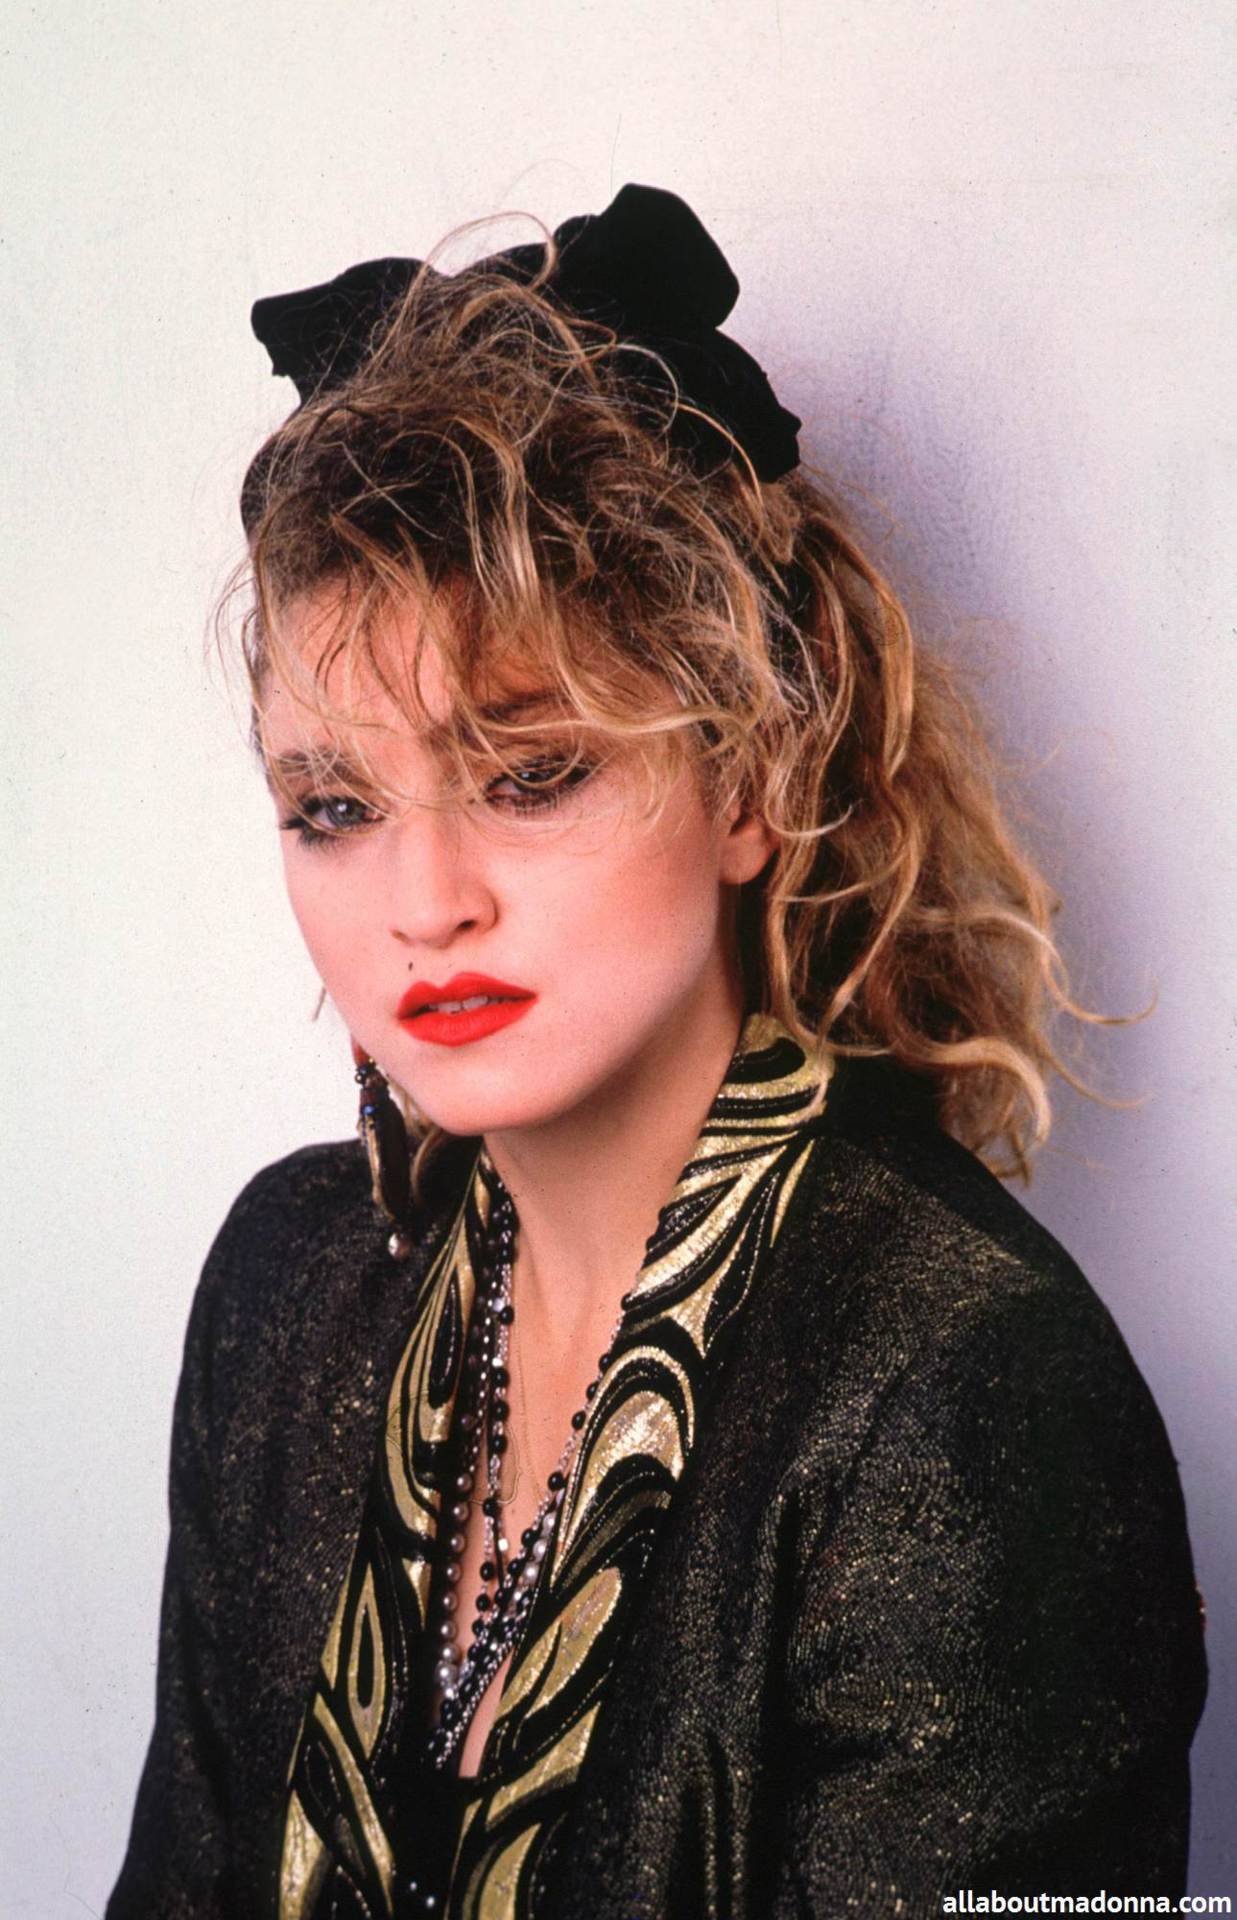 Discussion Madonna's Global Impact on Fashion & Popular Culture